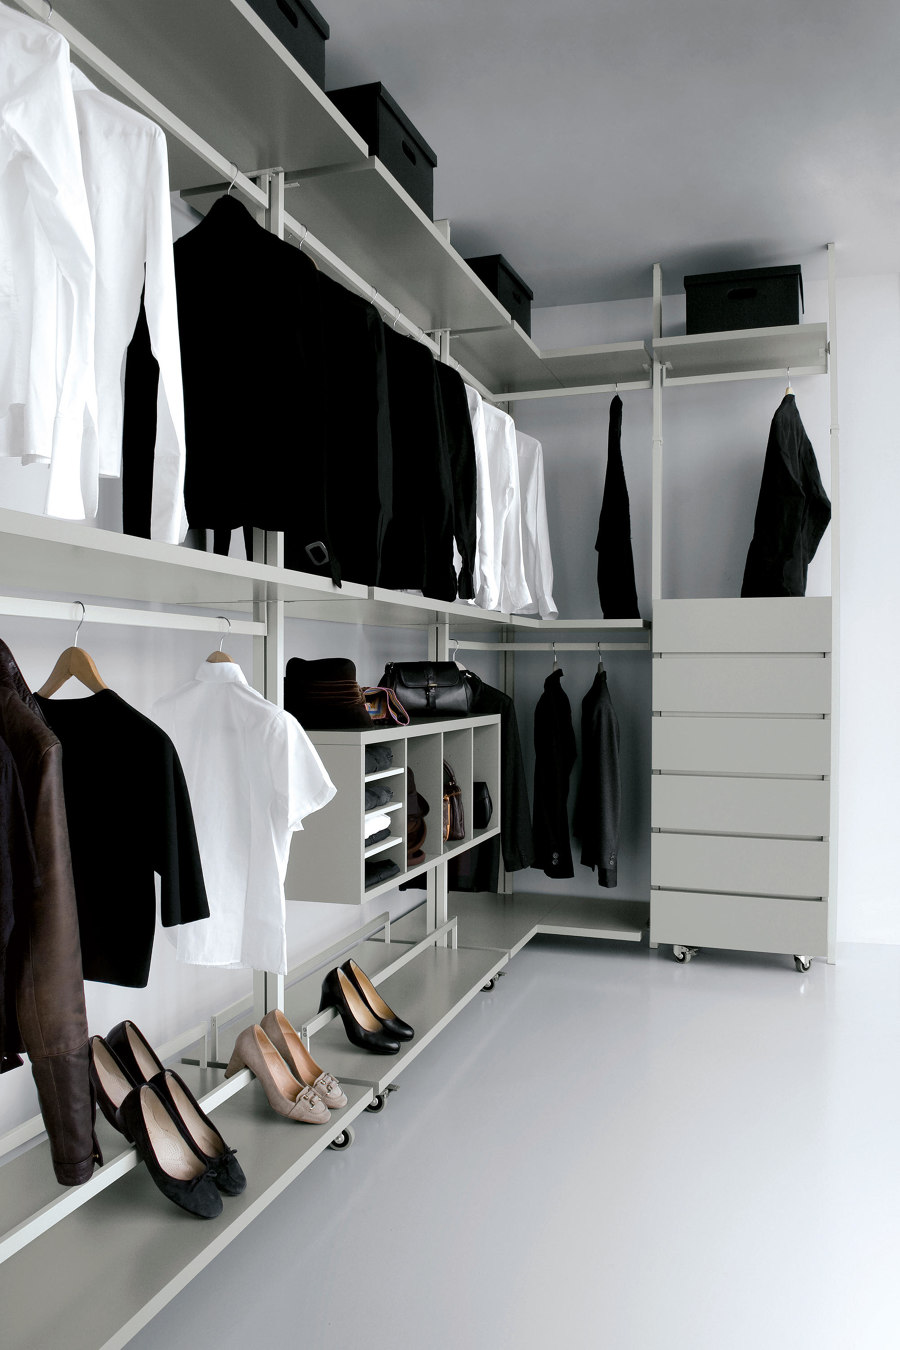 Eight storage features to keep wardrobes and closets organised | Novità